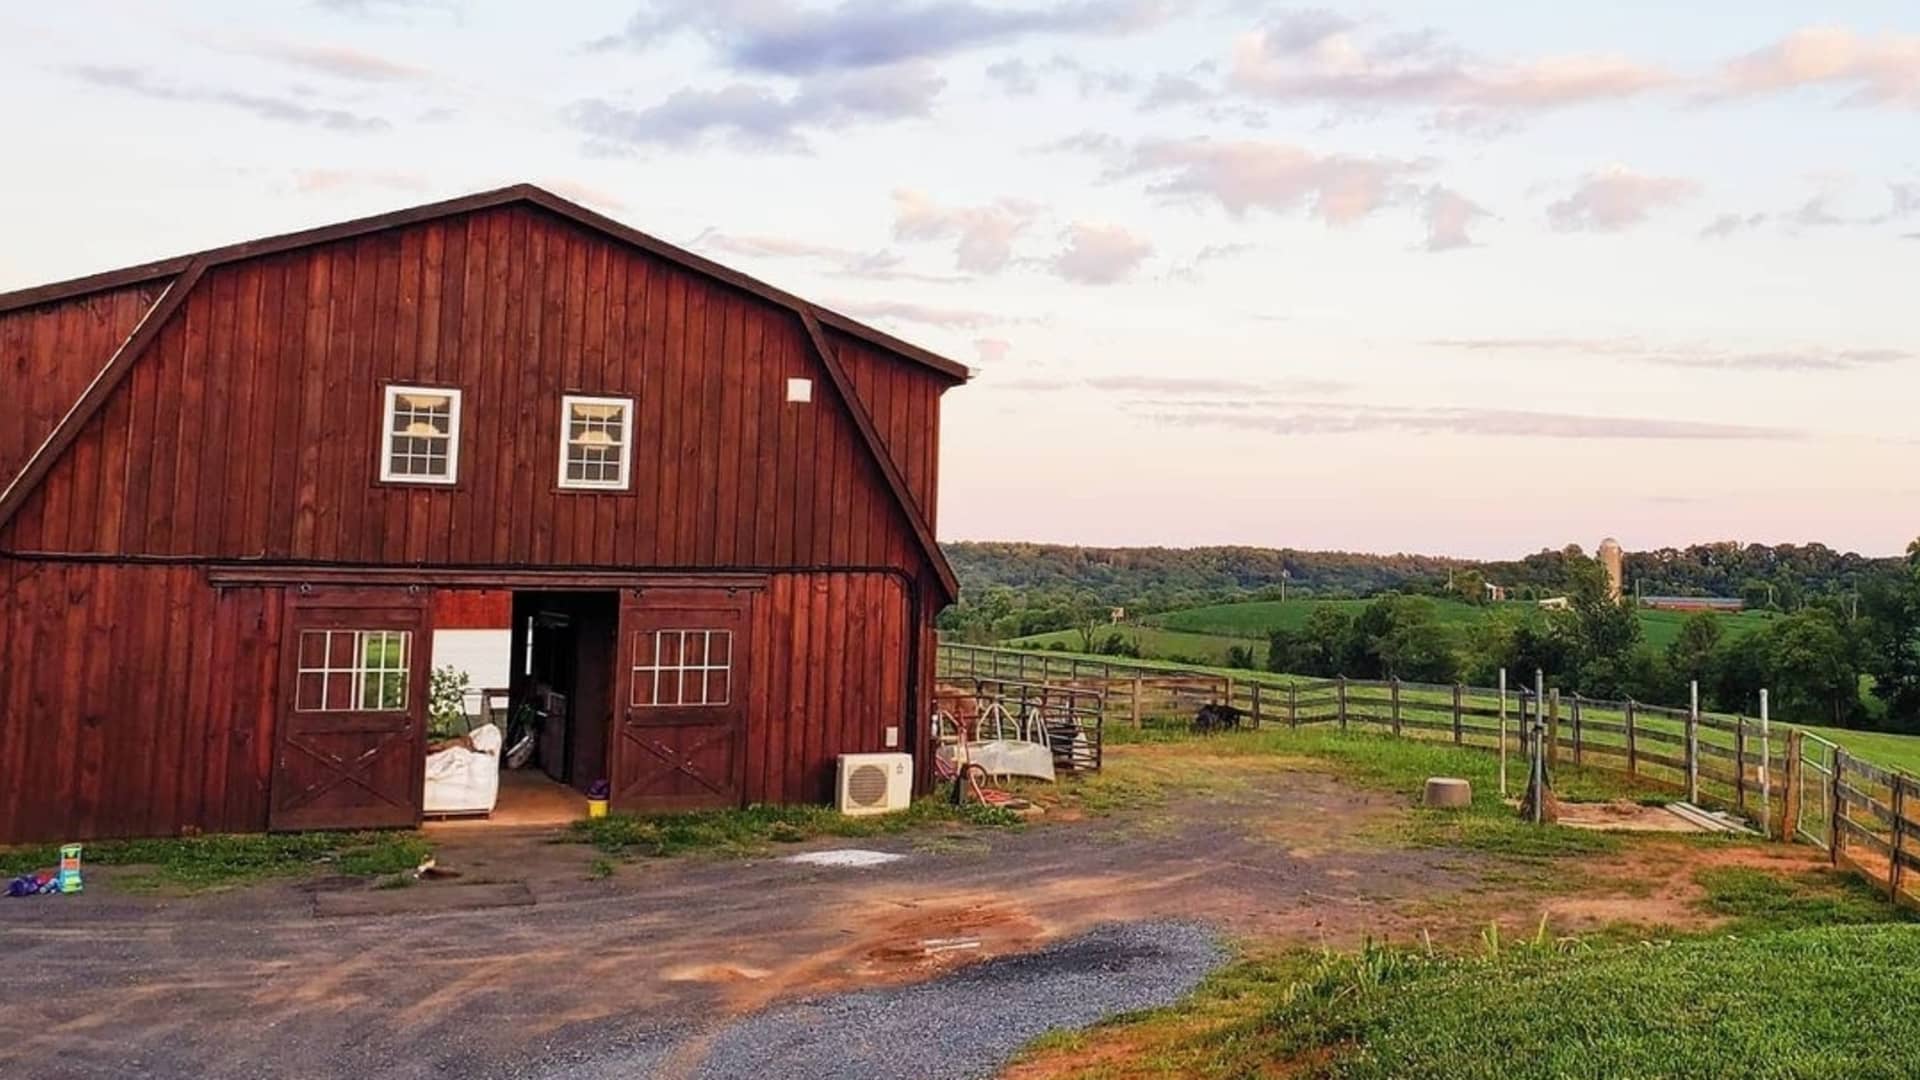 The Brown Barn, which also housed horses, sheep and goats, was Be Still Getaways' first property.